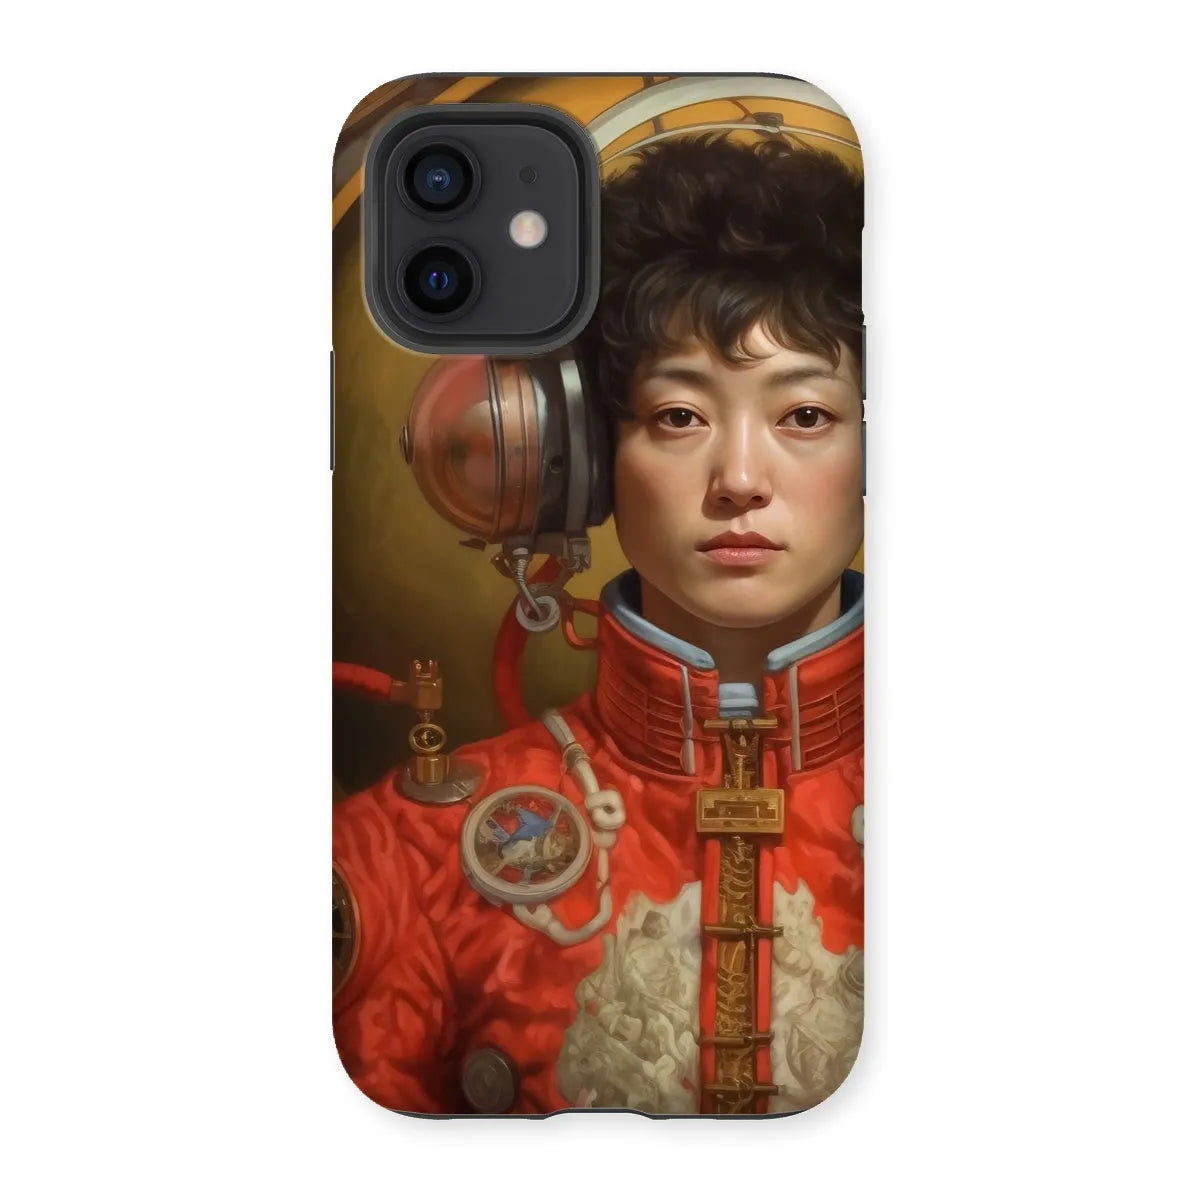 Mùchén - Gay Chinese Astronaut Aesthetic Phone Case - Iphone 12 / Matte - Mobile Phone Cases - Aesthetic Art